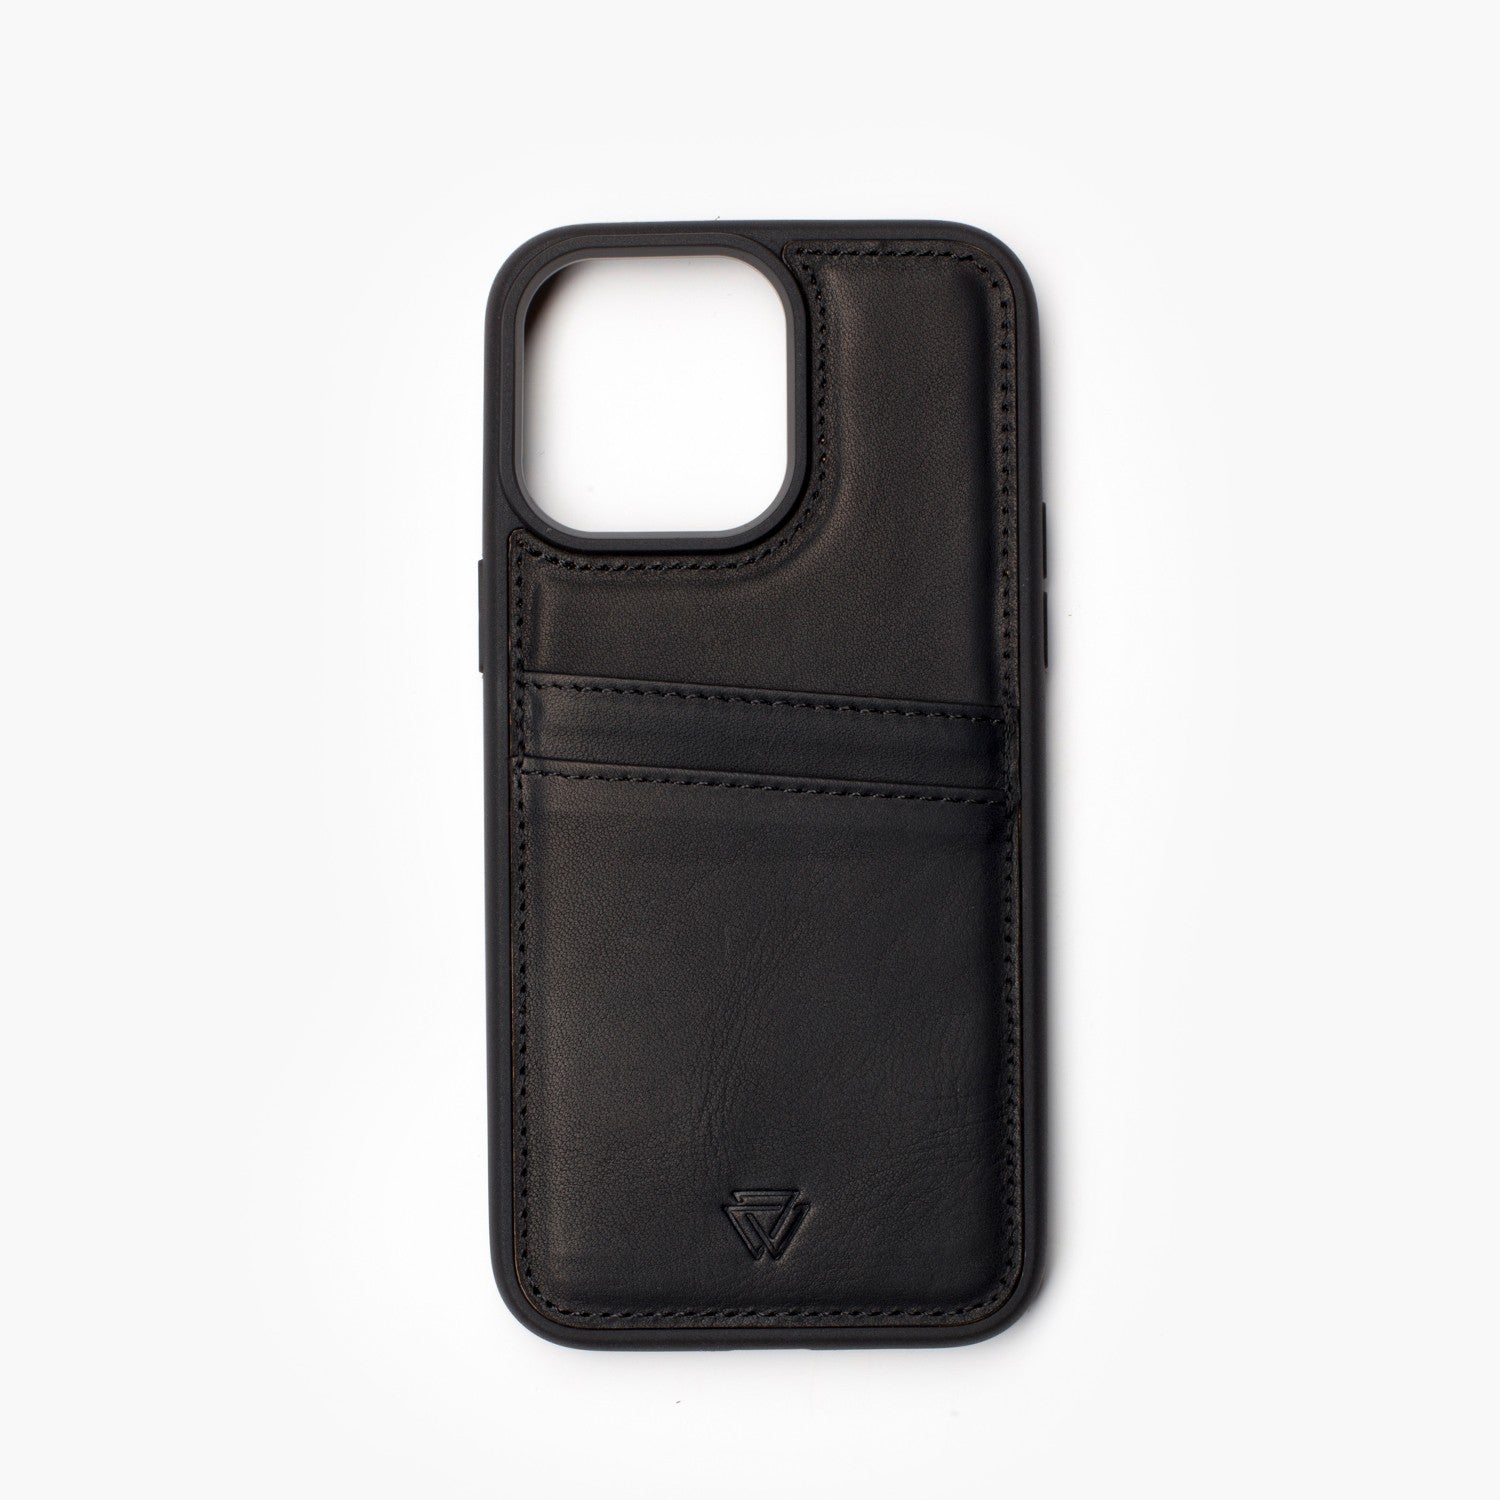 Wachikopa leather Back Cover C.C. Case for iPhone 12 Pro Max Black